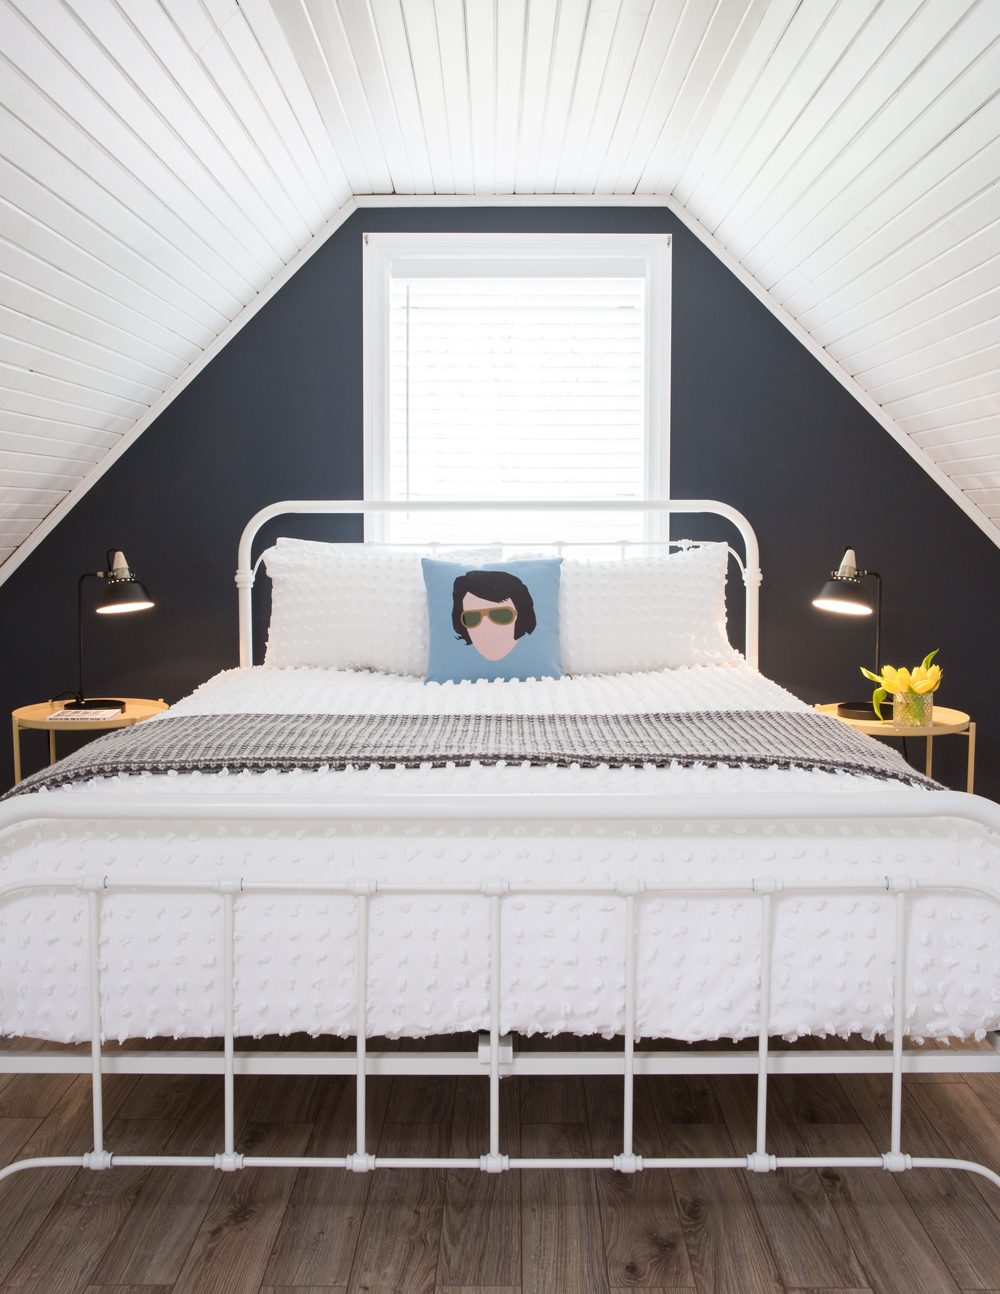 A guest bedroom with hardwood flooring and an Elvis Presley throw pillow